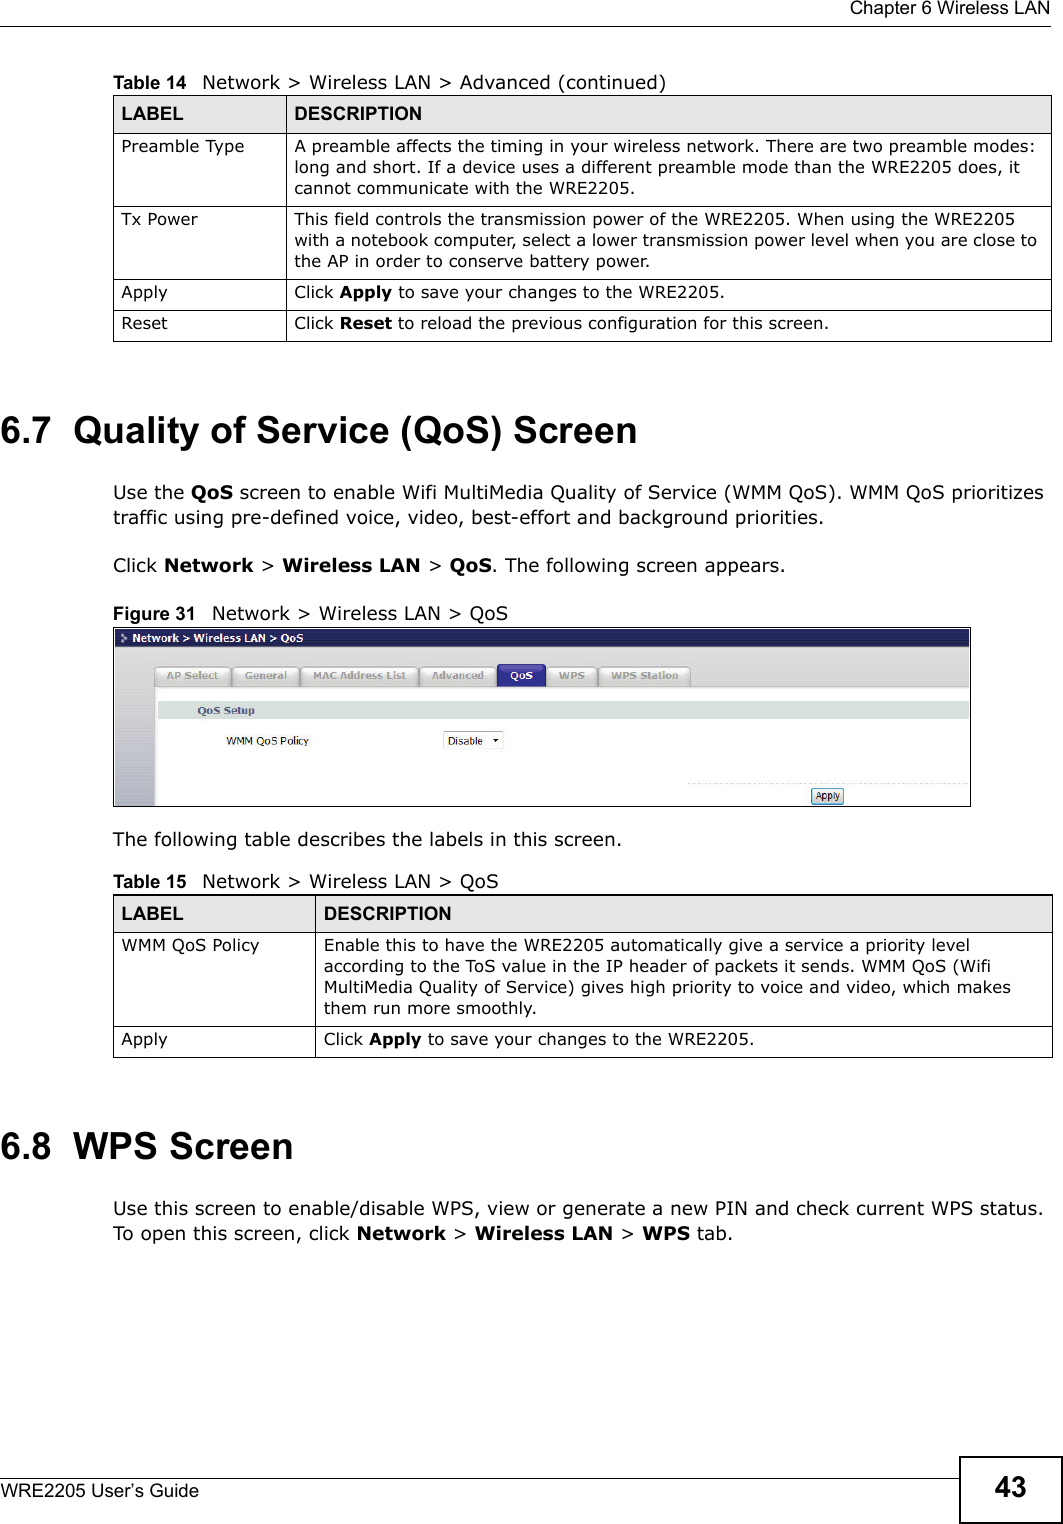  Chapter 6 Wireless LANWRE2205 User’s Guide 436.7  Quality of Service (QoS) ScreenUse the QoS screen to enable Wifi MultiMedia Quality of Service (WMM QoS). WMM QoS prioritizes traffic using pre-defined voice, video, best-effort and background priorities.Click Network &gt; Wireless LAN &gt; QoS. The following screen appears.Figure 31   Network &gt; Wireless LAN &gt; QoS The following table describes the labels in this screen. 6.8  WPS ScreenUse this screen to enable/disable WPS, view or generate a new PIN and check current WPS status. To open this screen, click Network &gt; Wireless LAN &gt; WPS tab.Preamble Type A preamble affects the timing in your wireless network. There are two preamble modes: long and short. If a device uses a different preamble mode than the WRE2205 does, it cannot communicate with the WRE2205.Tx Power This field controls the transmission power of the WRE2205. When using the WRE2205 with a notebook computer, select a lower transmission power level when you are close to the AP in order to conserve battery power.Apply Click Apply to save your changes to the WRE2205.Reset Click Reset to reload the previous configuration for this screen.Table 14   Network &gt; Wireless LAN &gt; Advanced (continued)LABEL DESCRIPTIONTable 15   Network &gt; Wireless LAN &gt; QoSLABEL DESCRIPTIONWMM QoS Policy Enable this to have the WRE2205 automatically give a service a priority level according to the ToS value in the IP header of packets it sends. WMM QoS (Wifi MultiMedia Quality of Service) gives high priority to voice and video, which makes them run more smoothly.Apply Click Apply to save your changes to the WRE2205.